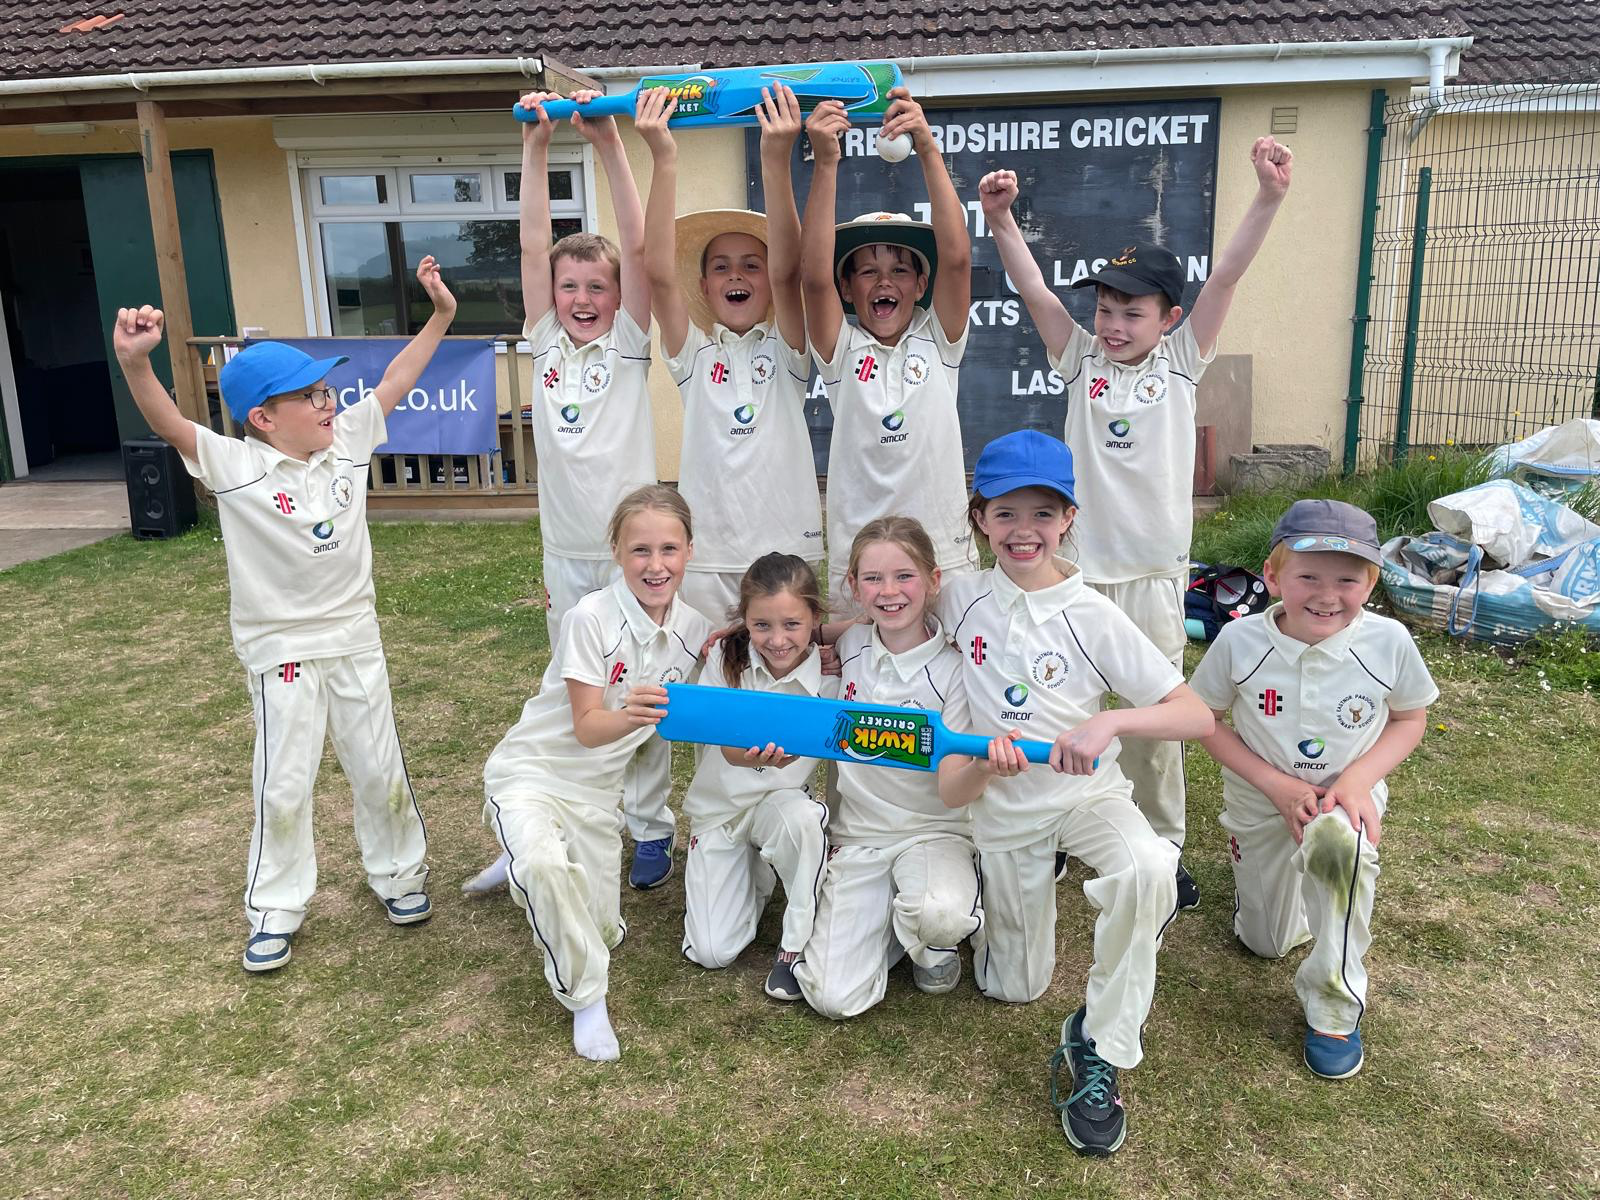 CRICKET | The enthusiastic young cricketers at Eastnor Parochial Primary School are celebrating following their outstanding performances at the Herefordshire Dynamos Cricket Finals Day